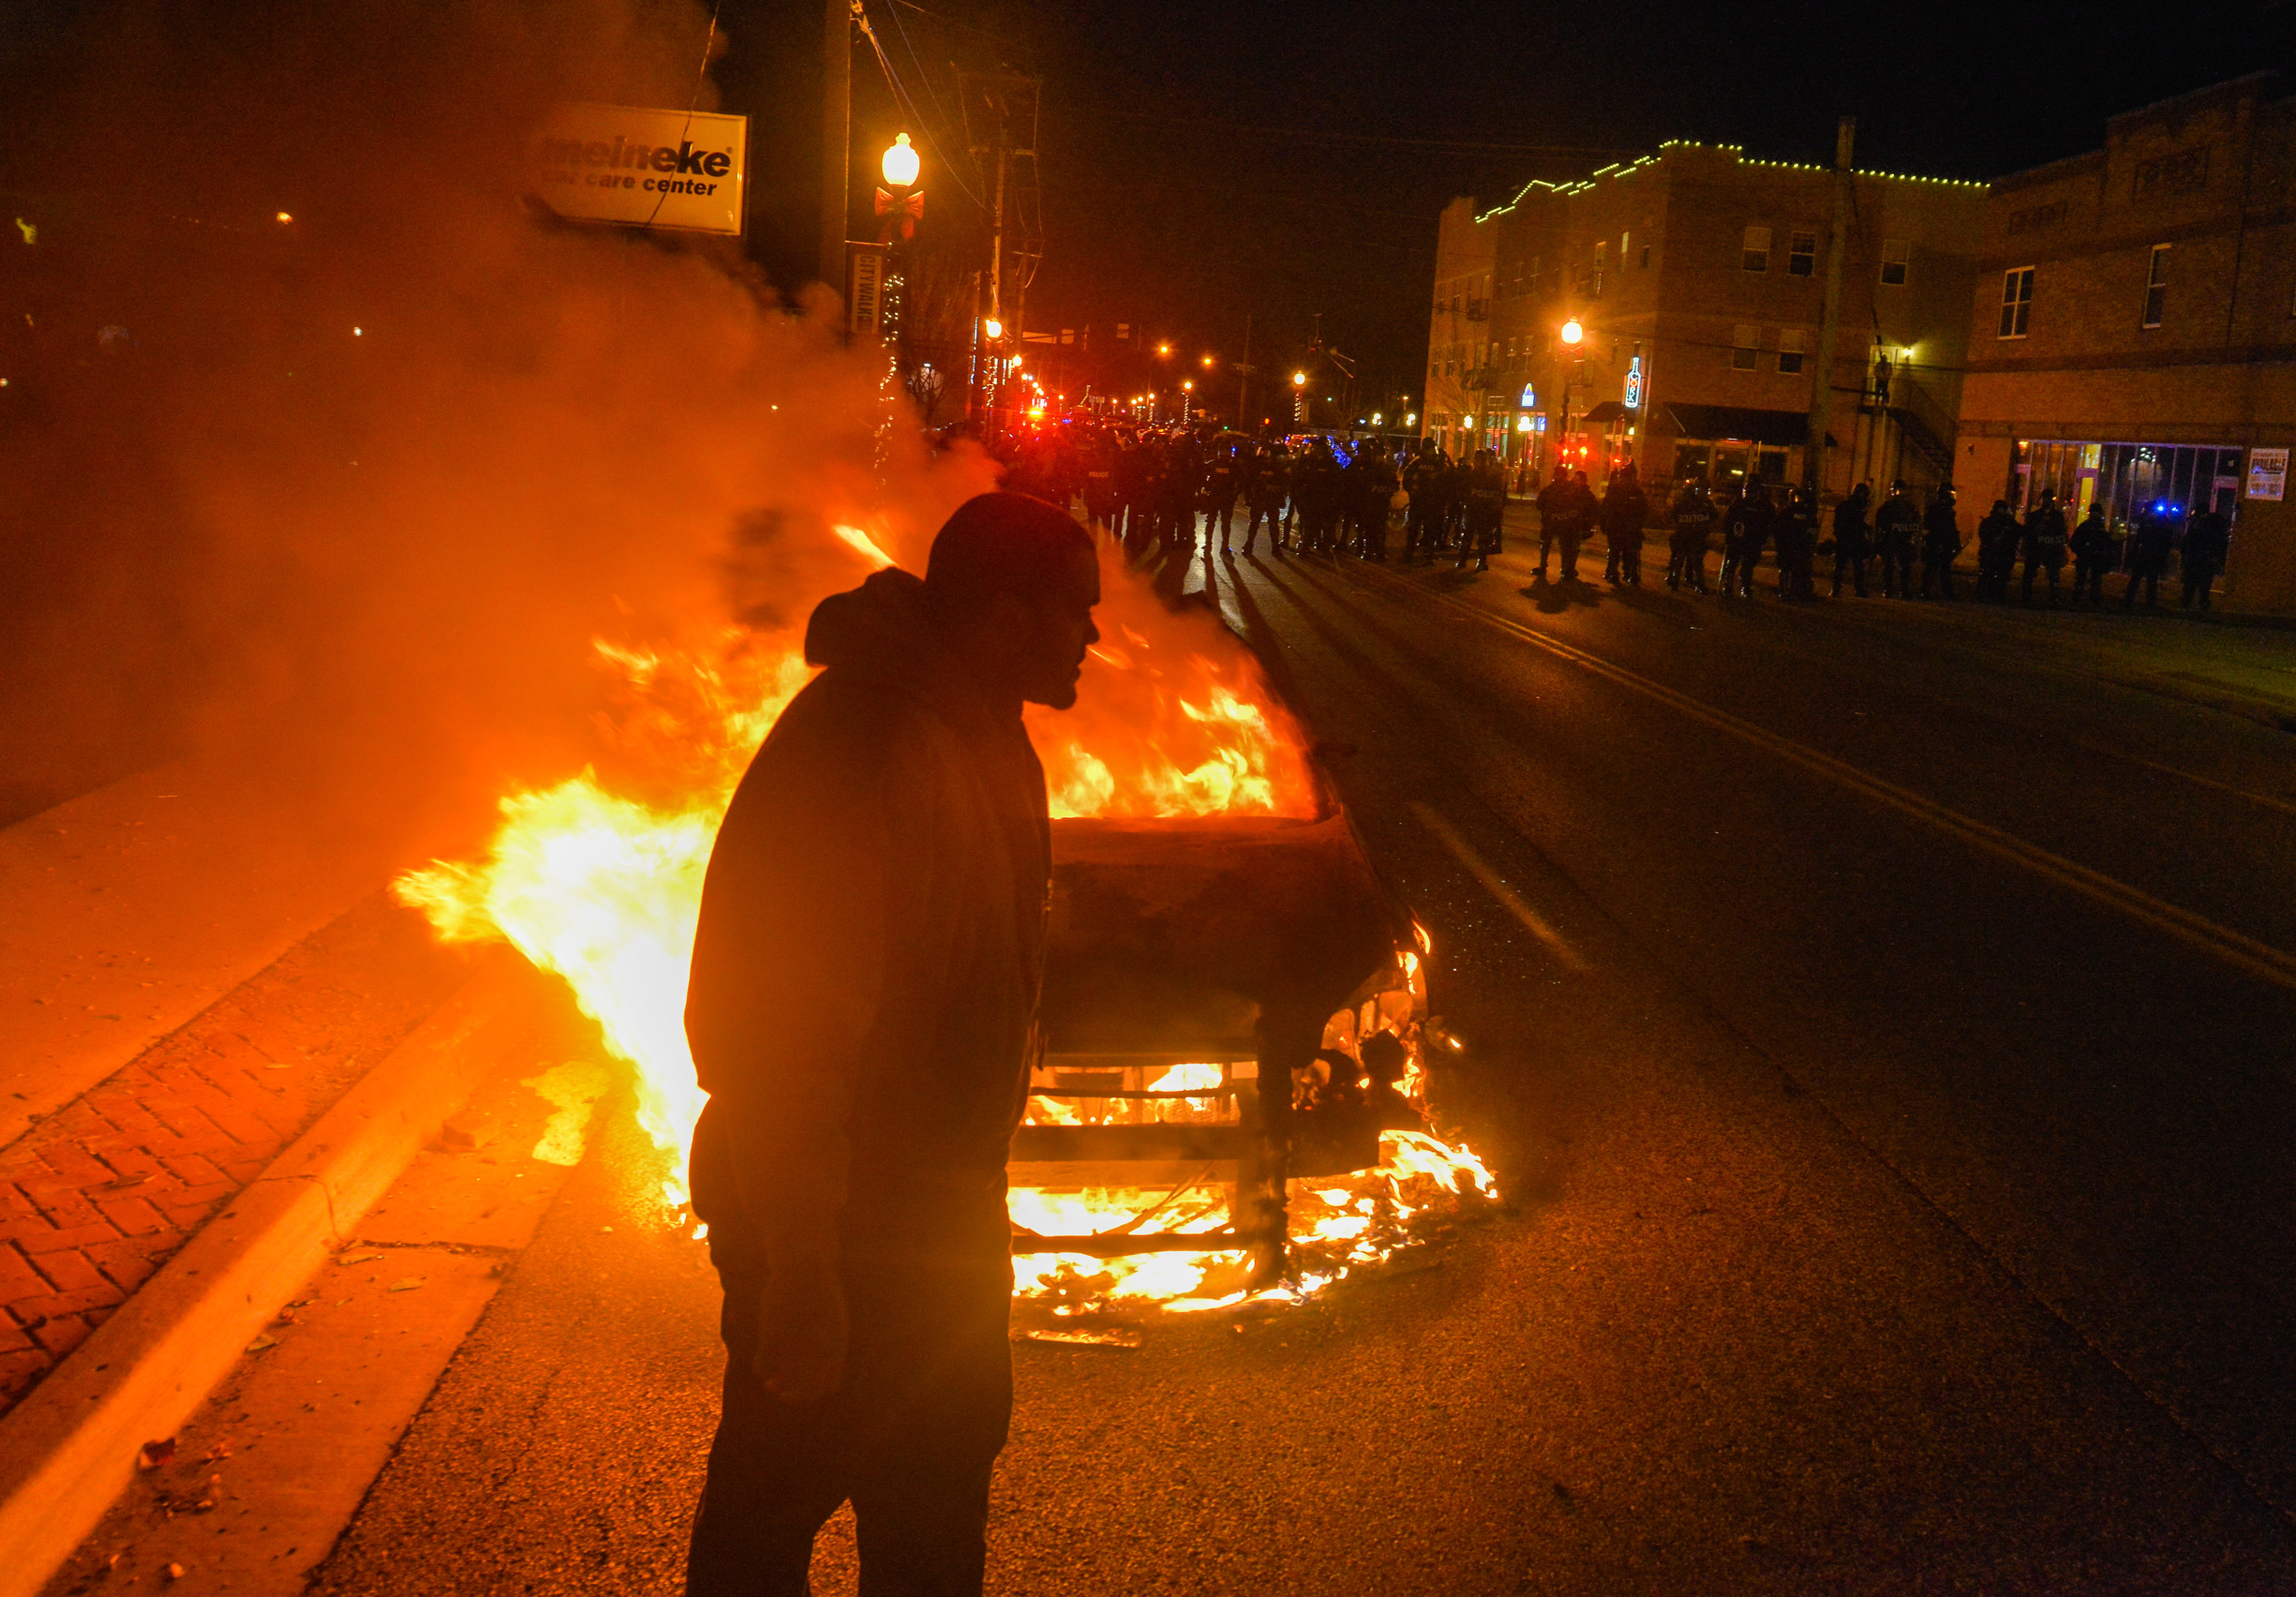 FERGUSON, MO - NOVEMBER 24: A man makes his way past a burning police car as a line of officers prepare to clear the street of protesters after an announcement that Ferguson police officer Darren Wilson will not be indicted in the fatal shooting of unarmed teenager Michael Brown, on Monday, November 24, 2014, in Ferguson, MO.  The shooting of Michael Brown, an unarmed black 18-year-old by white Ferguson police officer Darren Wilson, has captivated the nation as a grand jury deliberated to decide whether to charge the officer with a crime.   (Photo by Jahi Chikwendiu/The Washington Post)